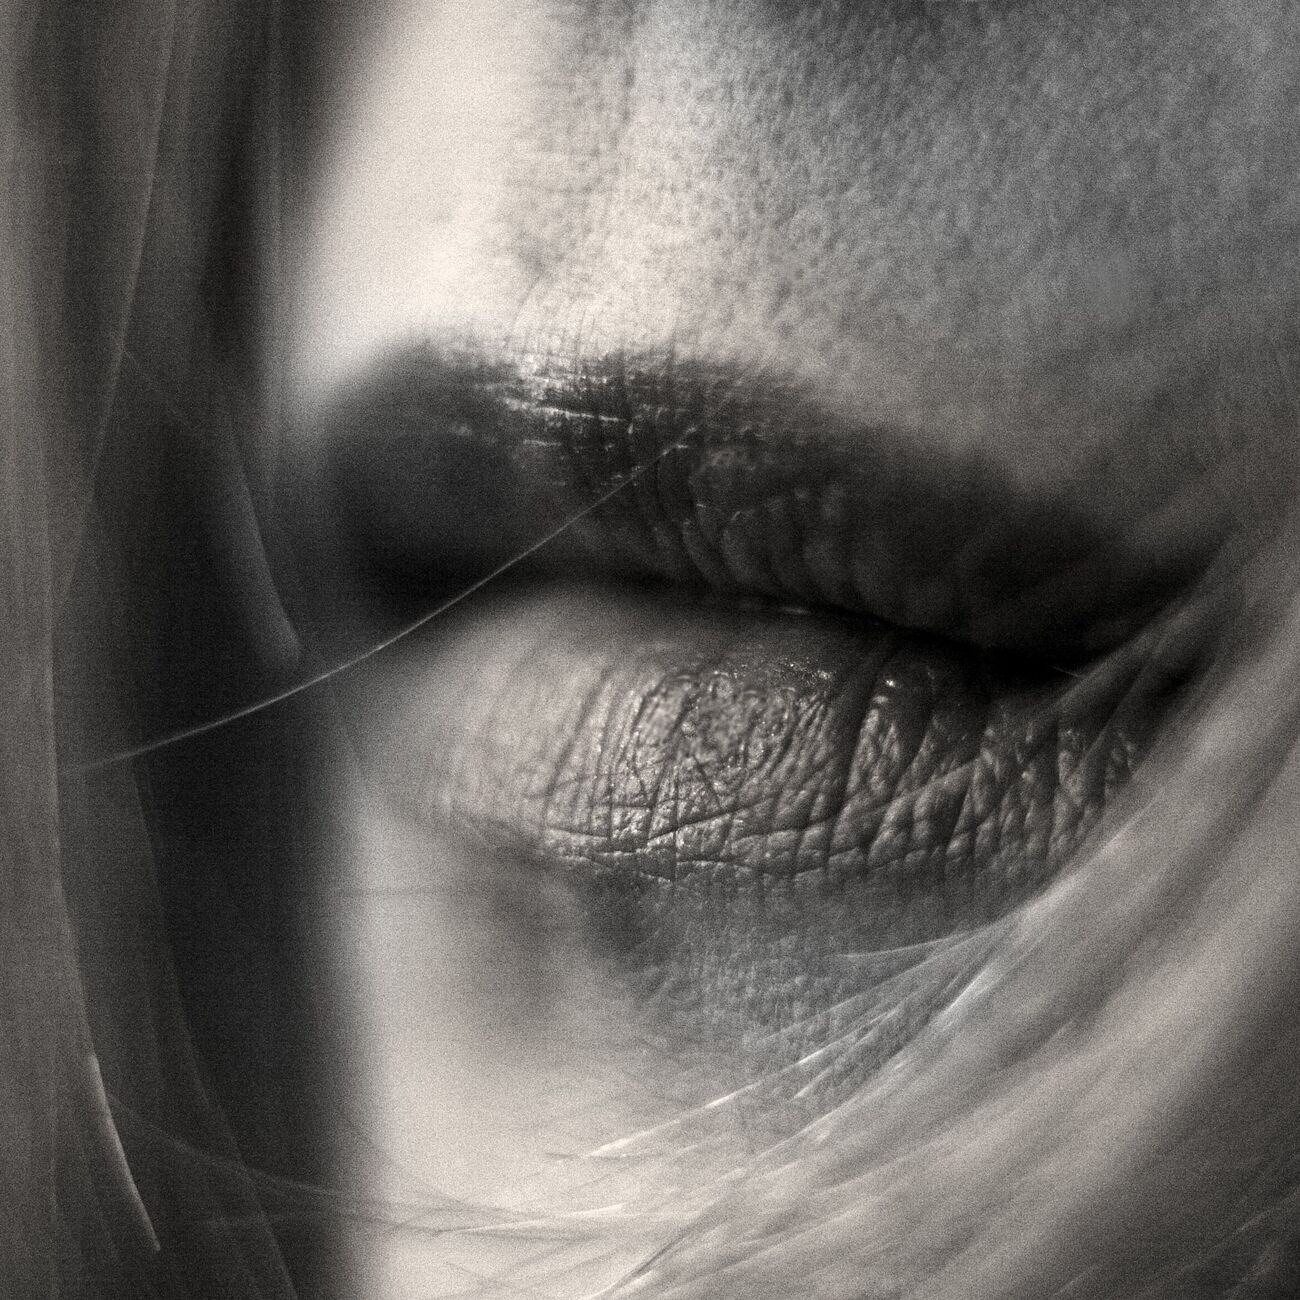 Purchase a 9.1 x 9.1 in, Sweet on her lips. Ref-580-1 - Denis Olivier Art Photography